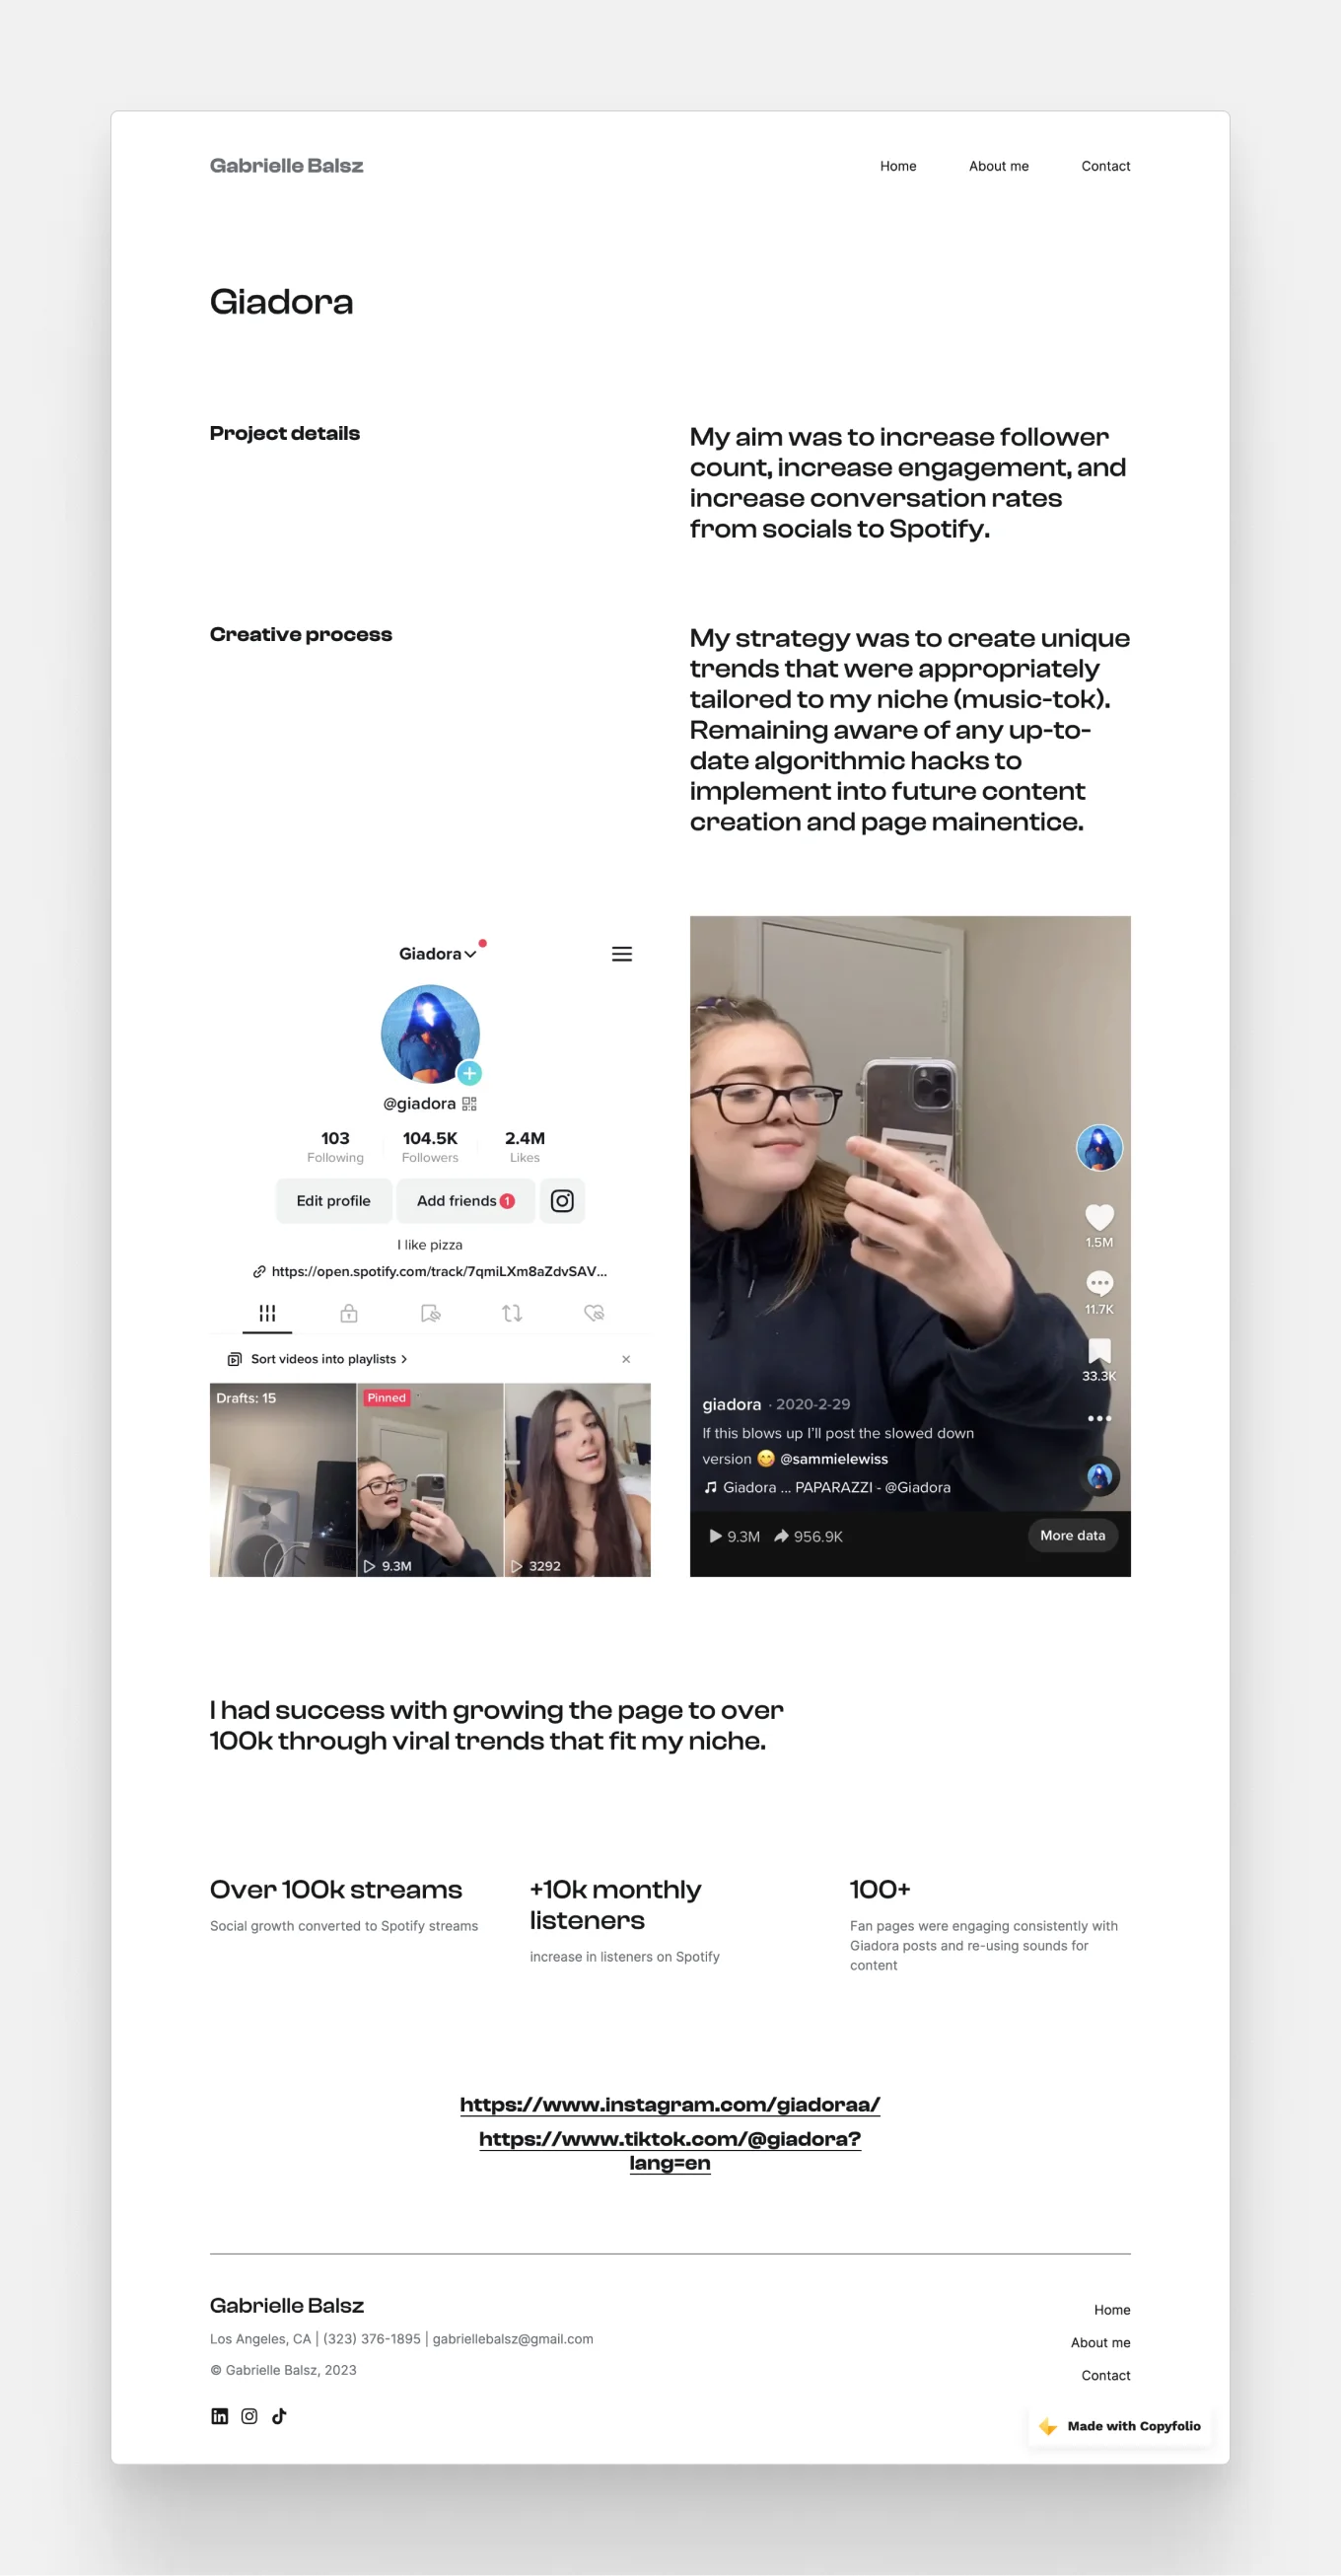 the social media case study of Gabrielle, for her personal singing brand Giadora, and the work she did for it on TikTok